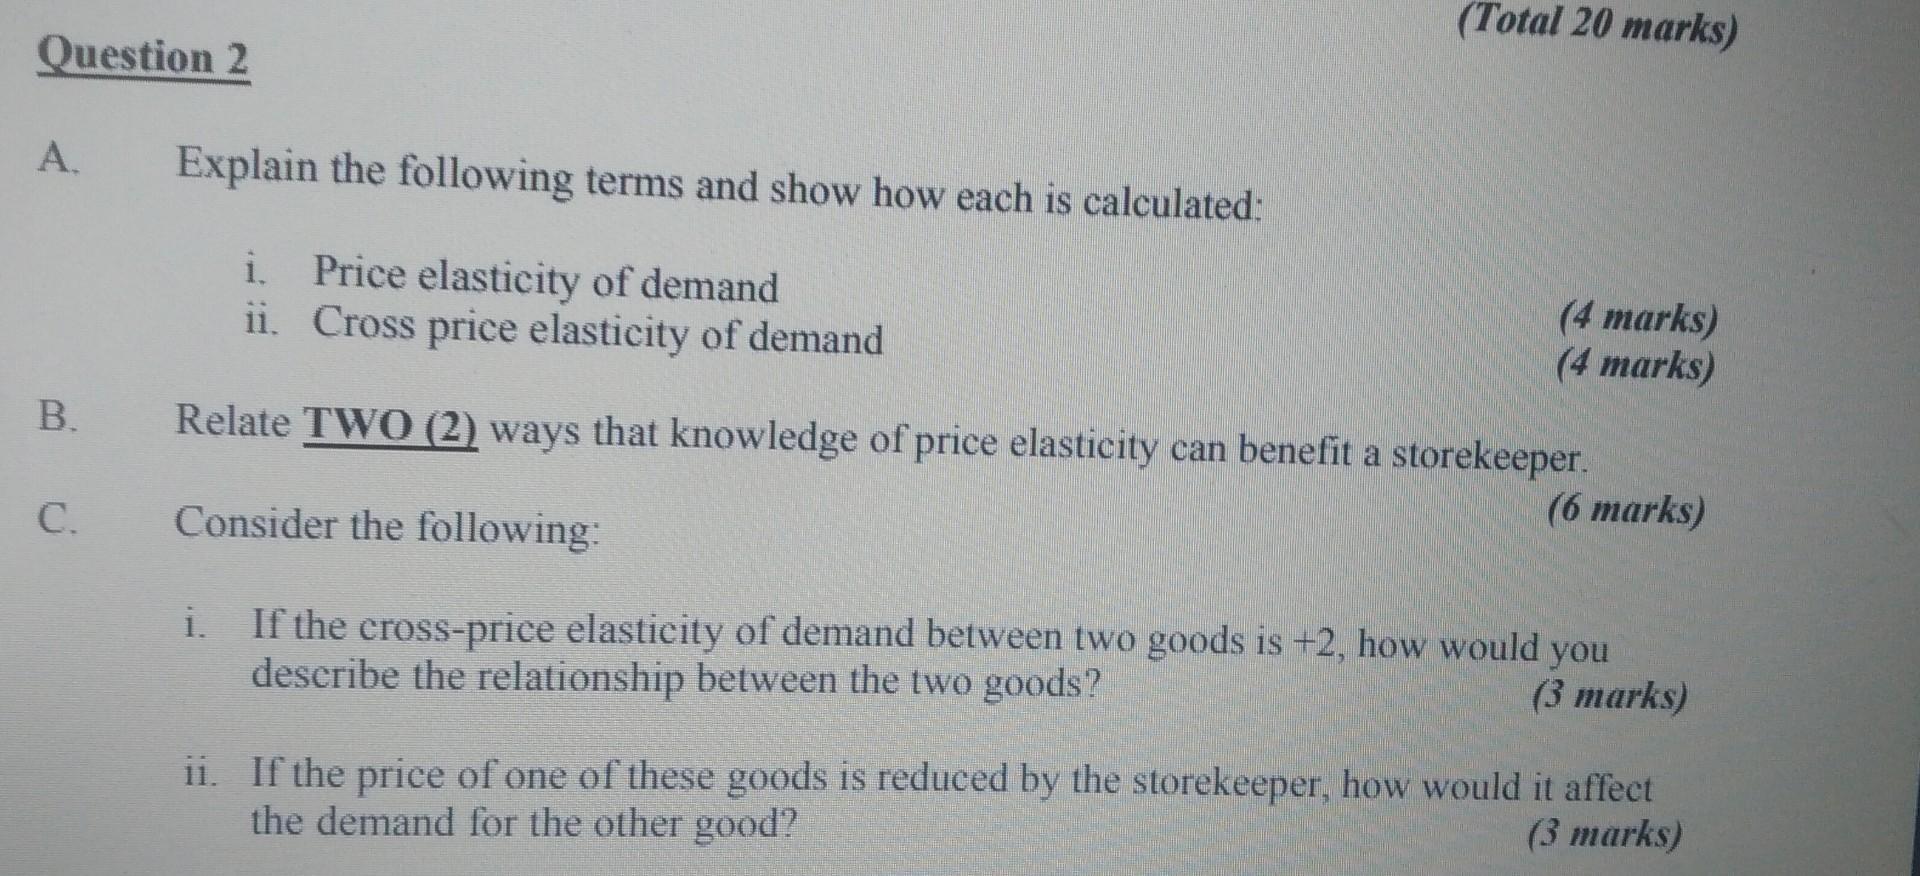 A. Explain the following terms and show how each is calculated:
i. Price elasticity of demand
ii. Cross price elasticity of d